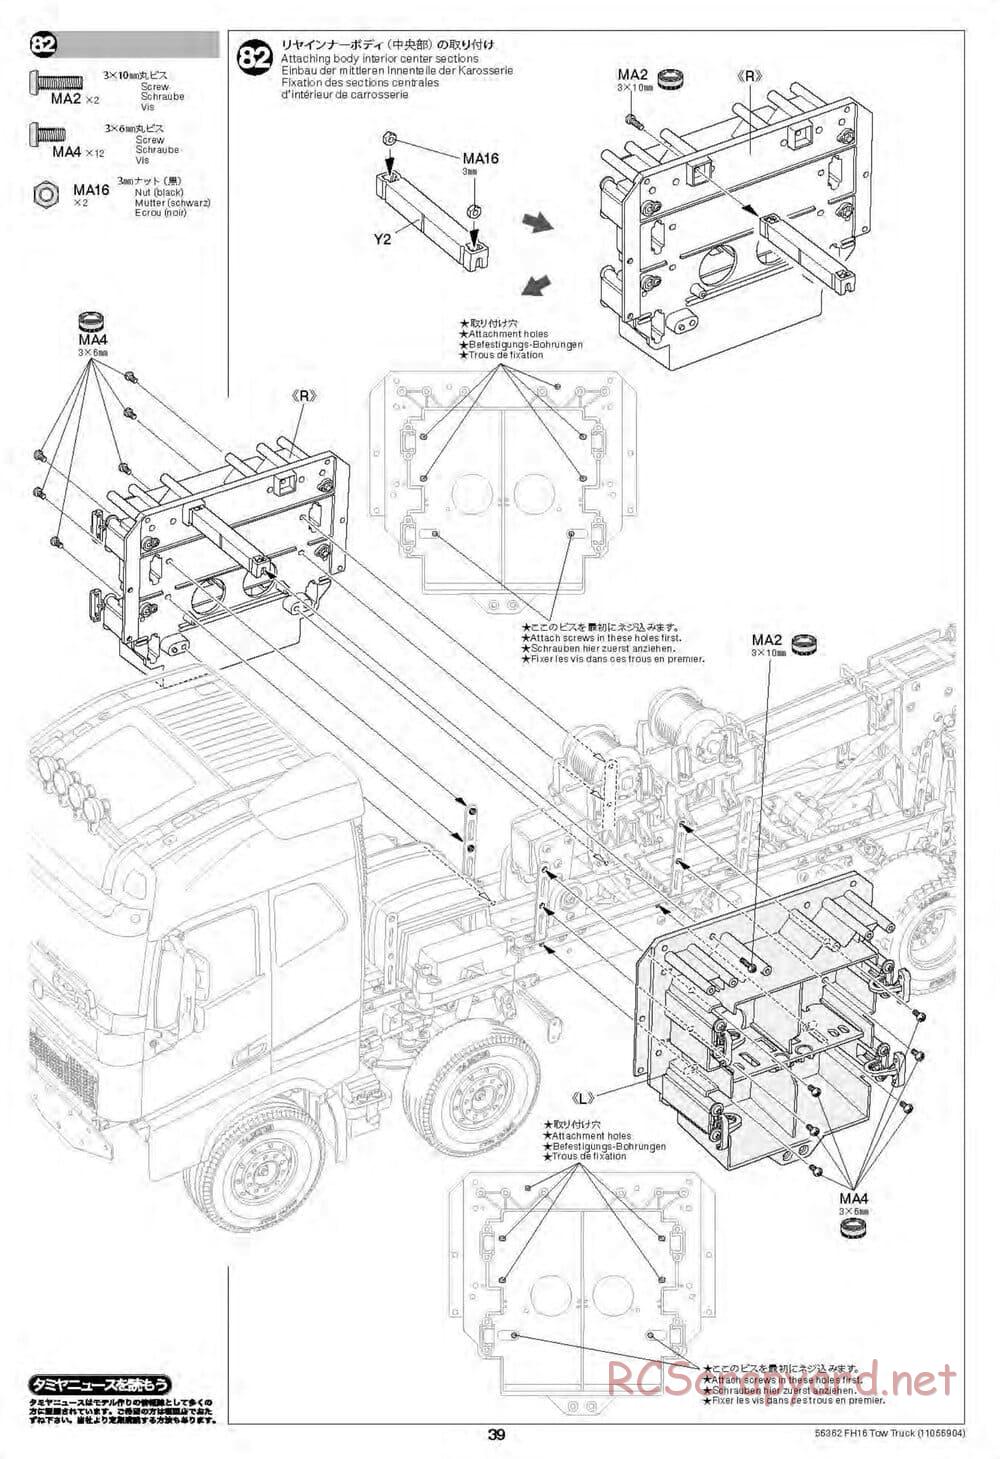 Tamiya - Volvo FH16 Globetrotter 750 8x4 Tow Truck - Manual - Page 39